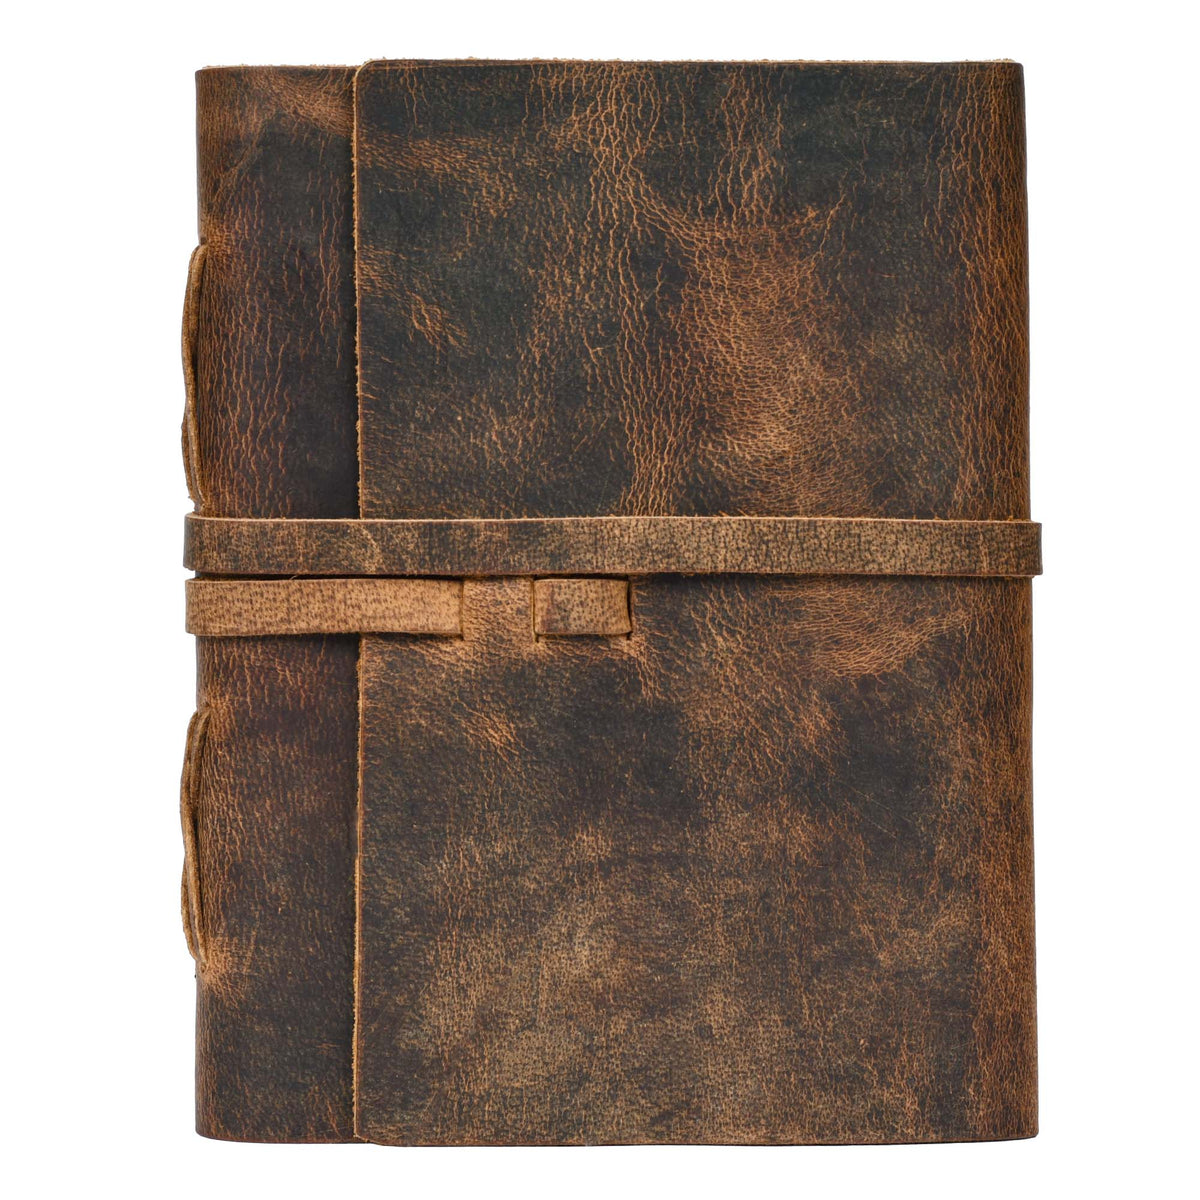 Leather Journal Writing Notebook - Lined Paper 300 Kraft Pages, Rustic Brown - Handmade Genuine Leather Bound Daily Notepad for Men &amp; Women</p>